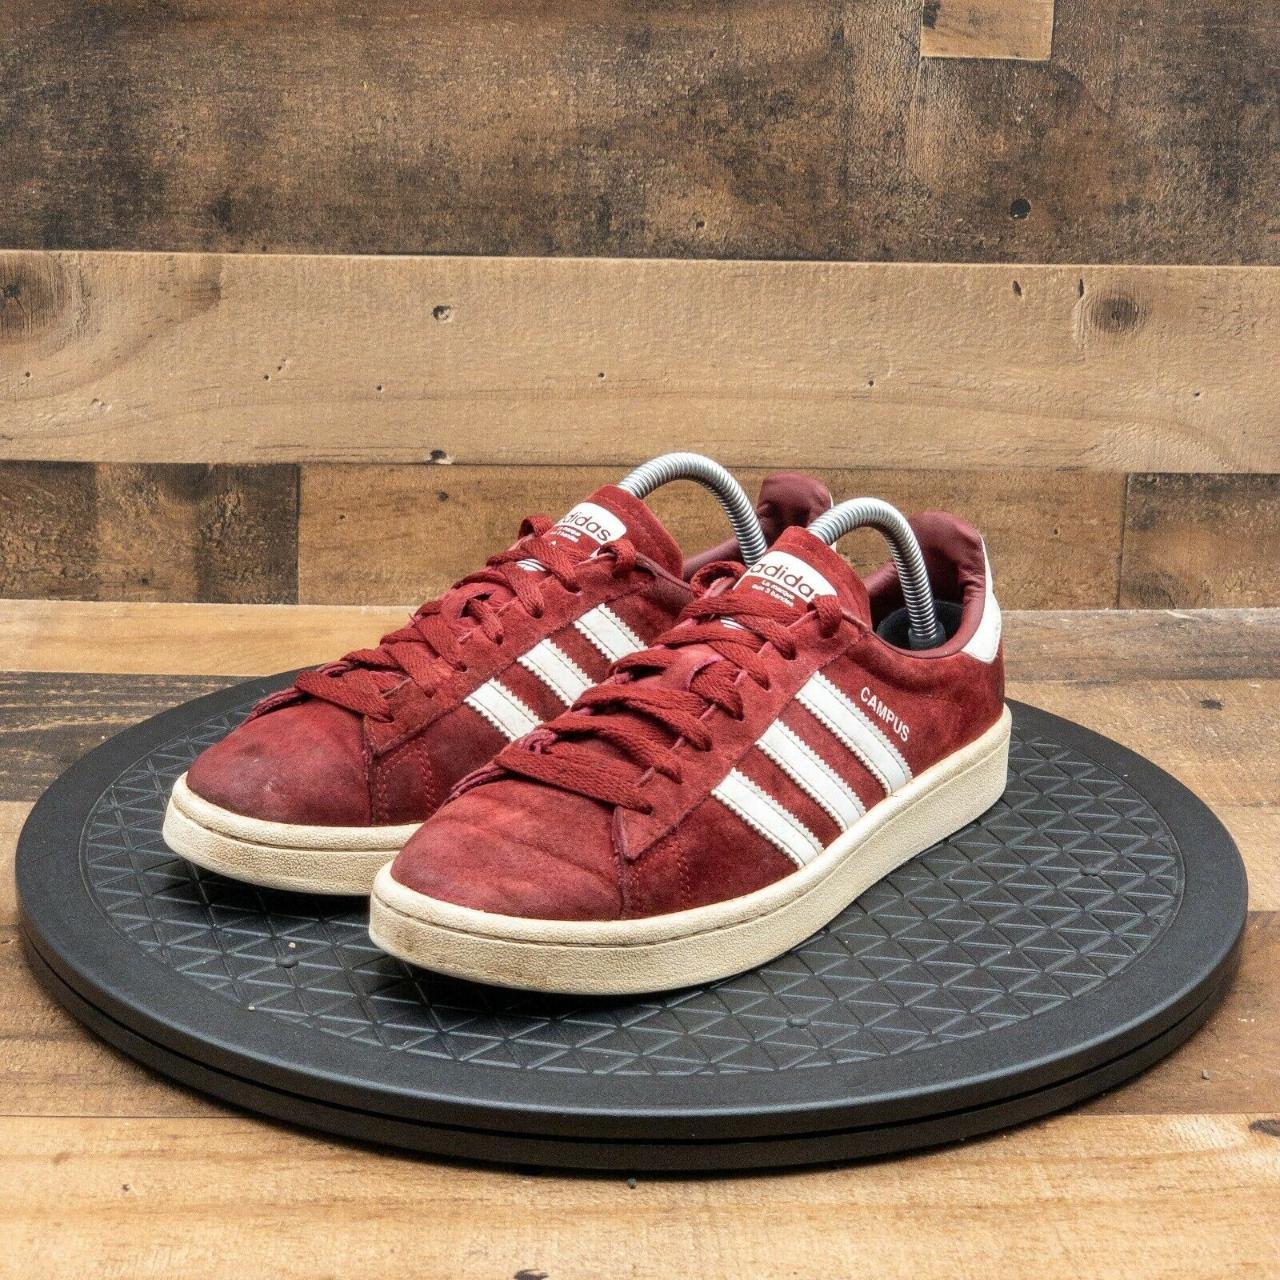 Product Image 2 - Adidas Campus Men's Casual Shoes